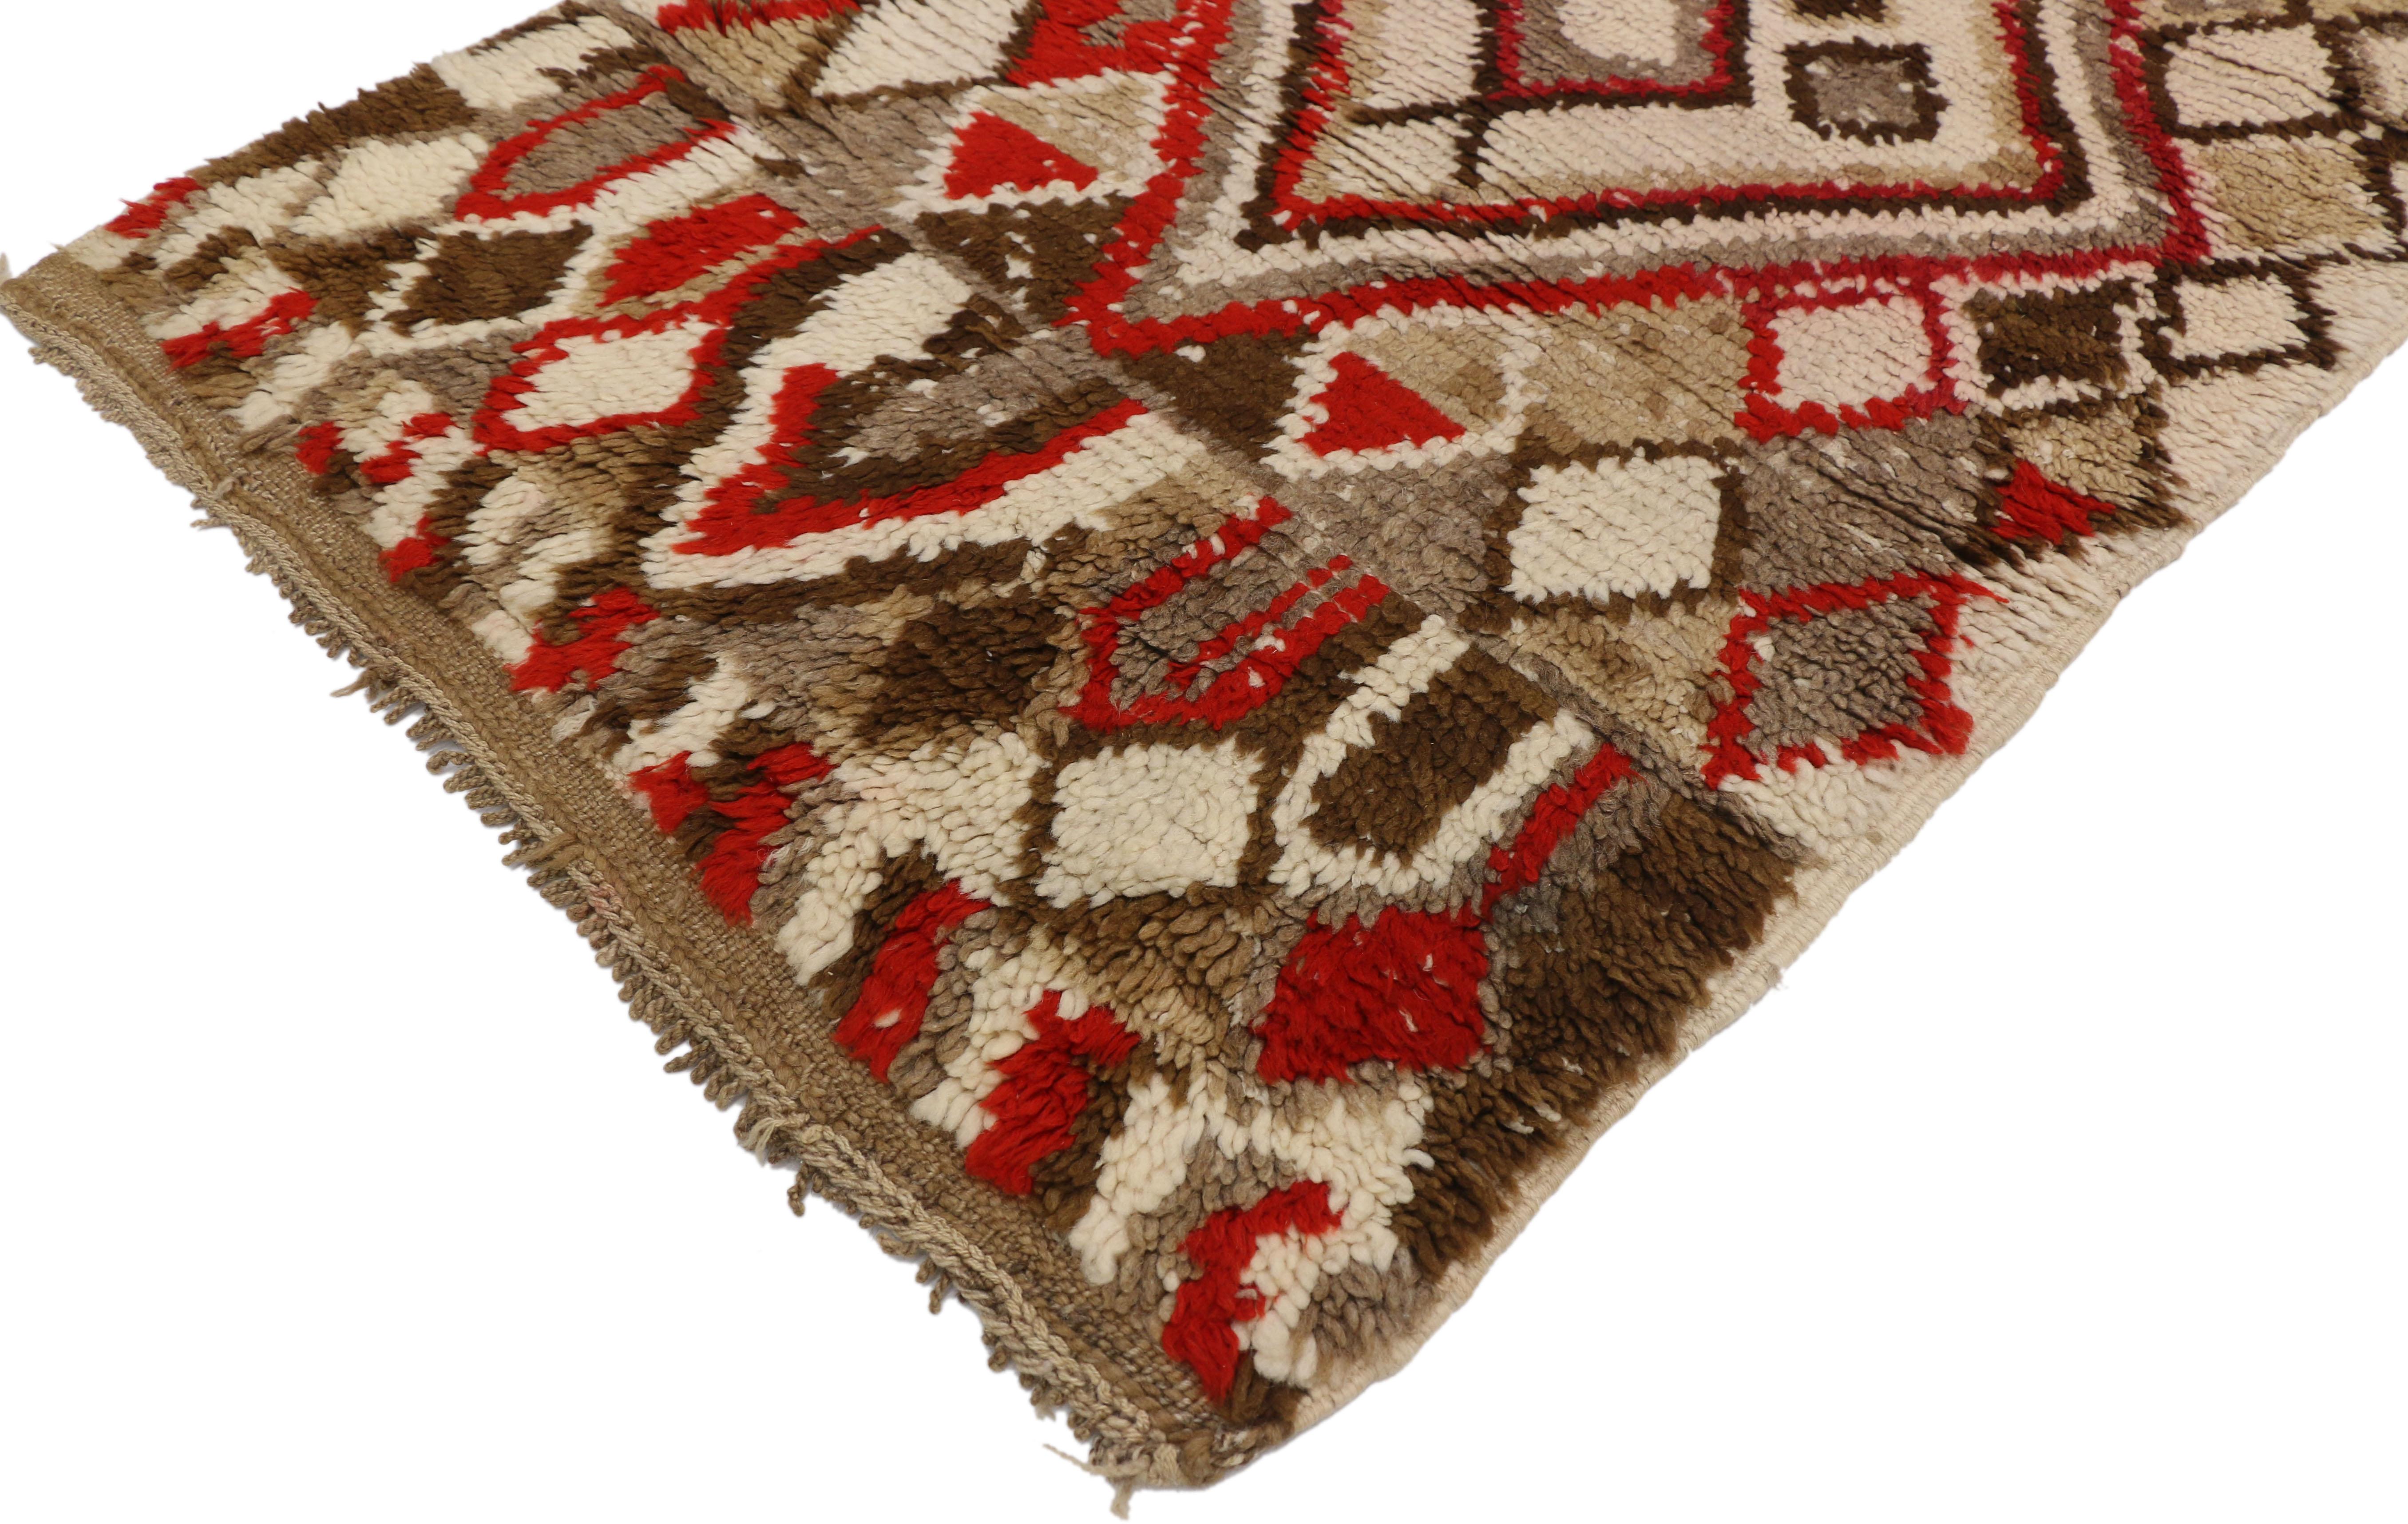 20871, vintage Berber Moroccan Azilal rug with Mid-Century Modern tribal style. This hand knotted wool vintage Moroccan Azilal rug features a two large scale diamonds surrounded by a diamond trellis spread across the field. Zigzag lines come